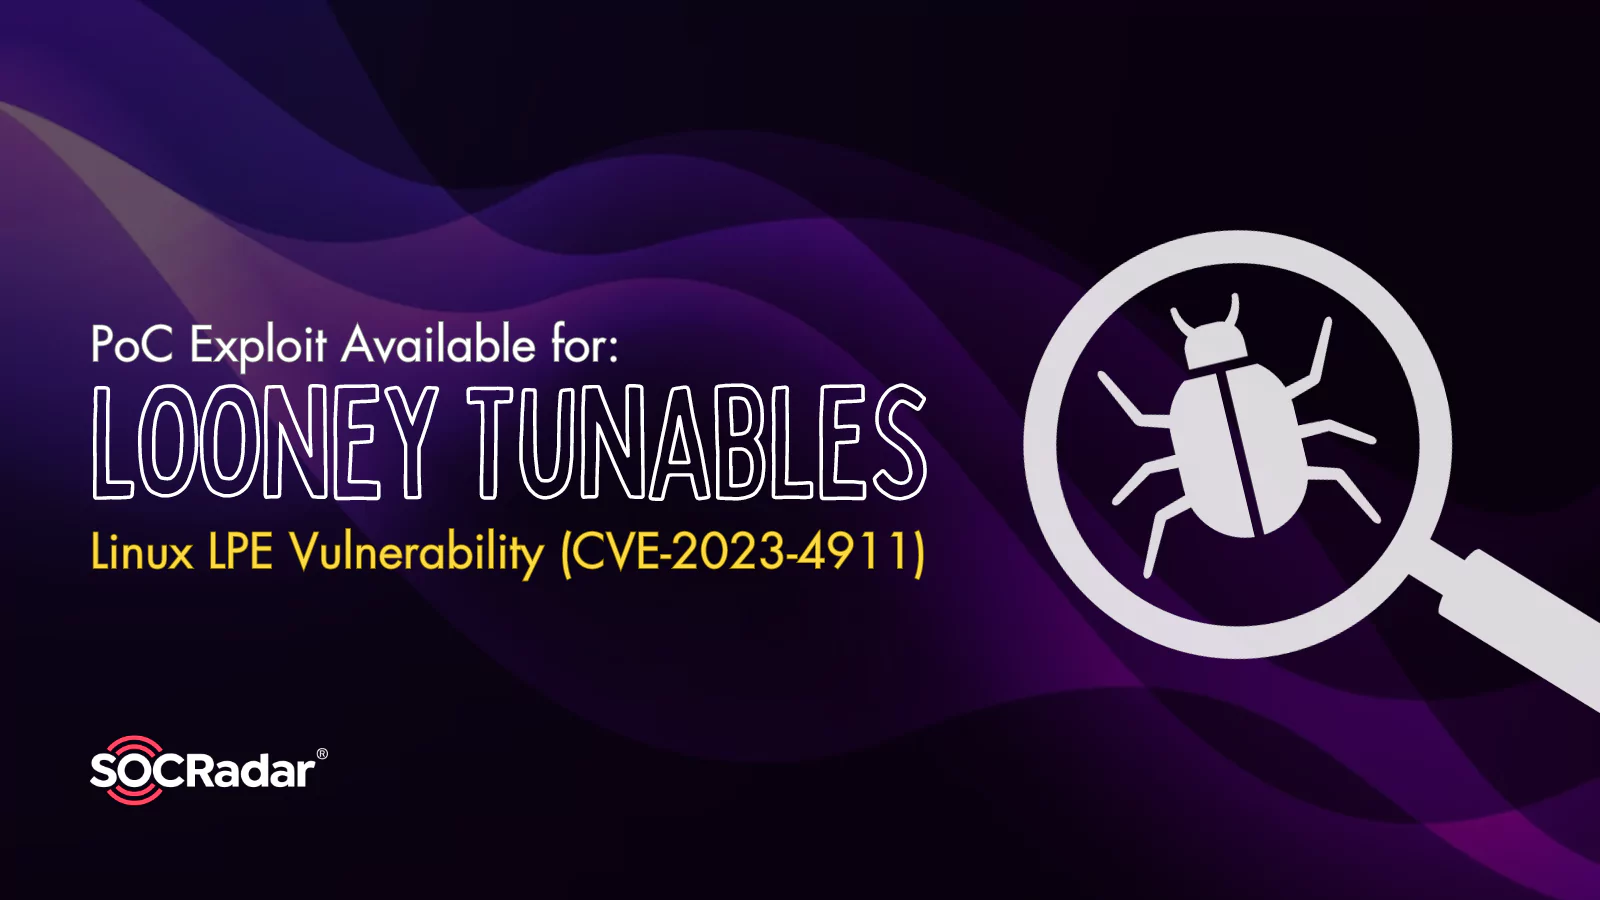 SOCRadar® Cyber Intelligence Inc. | Looney Tunables: PoC Available for LPE Vulnerability Impacting Major Linux Distributions (CVE-2023-4911)